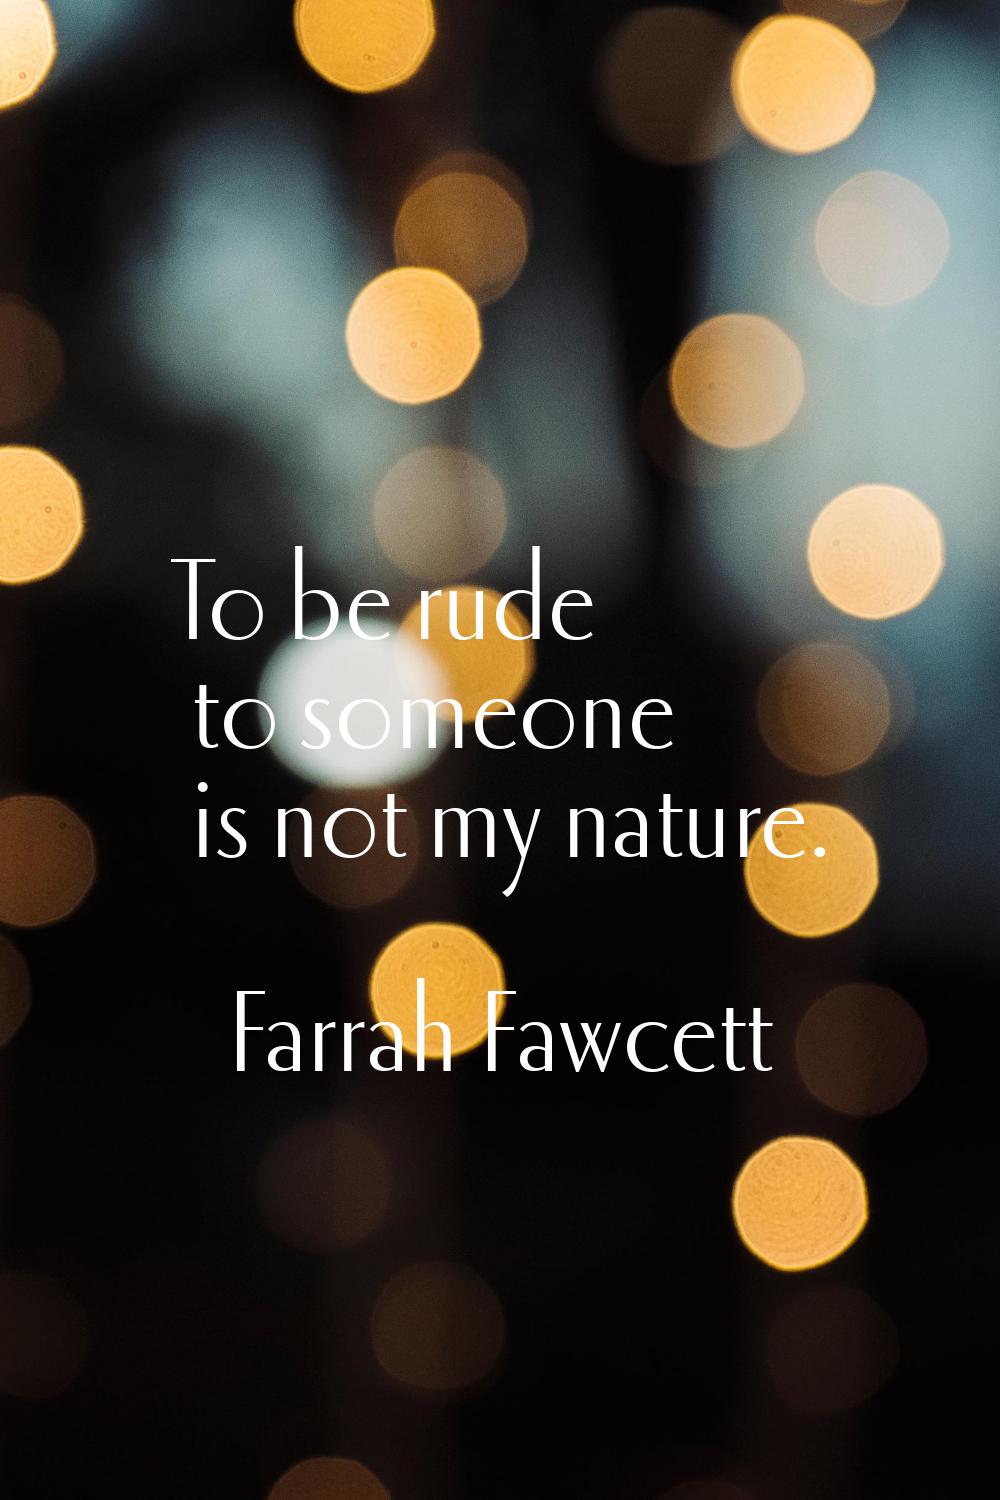 To be rude to someone is not my nature.